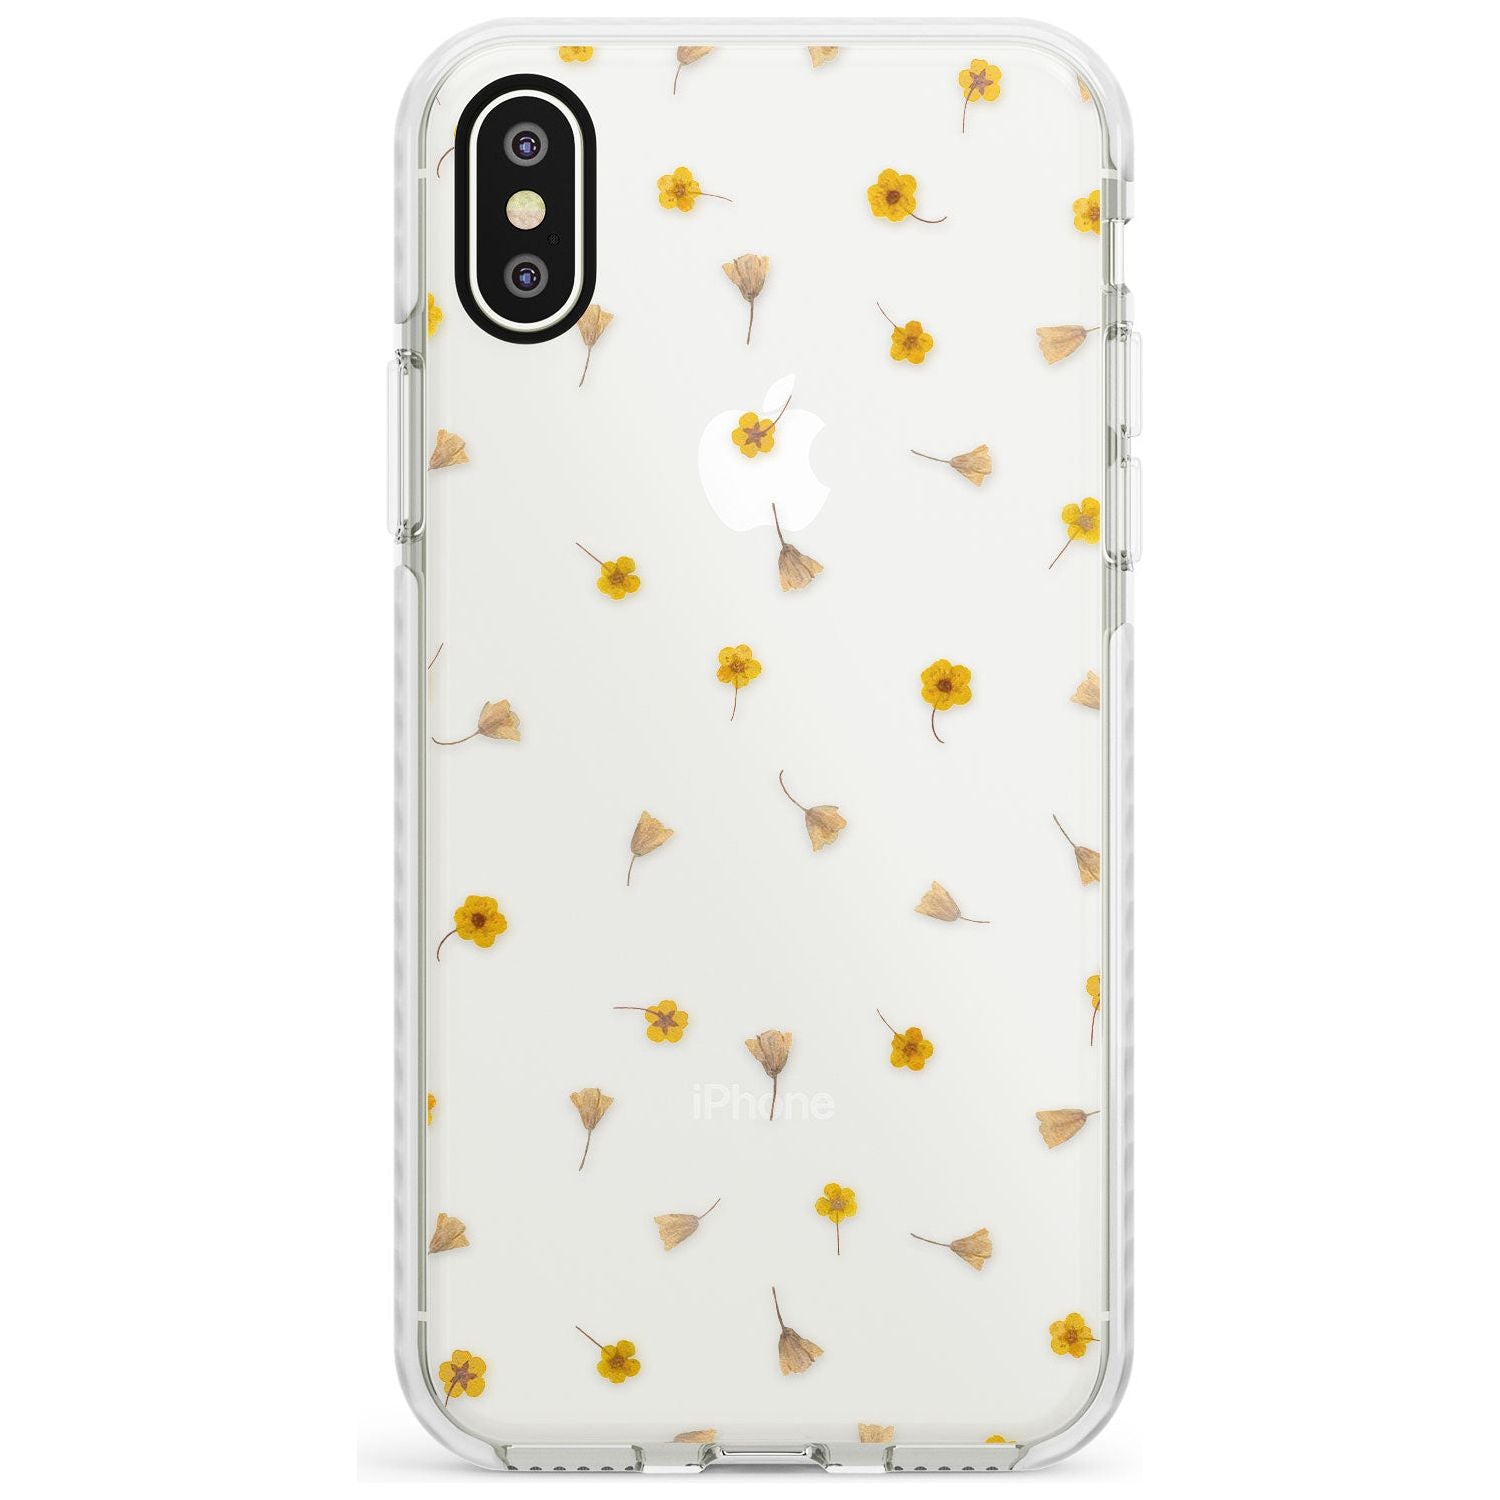 Small Flower Mix - Dried Flower-Inspired Design Impact Phone Case for iPhone X XS Max XR